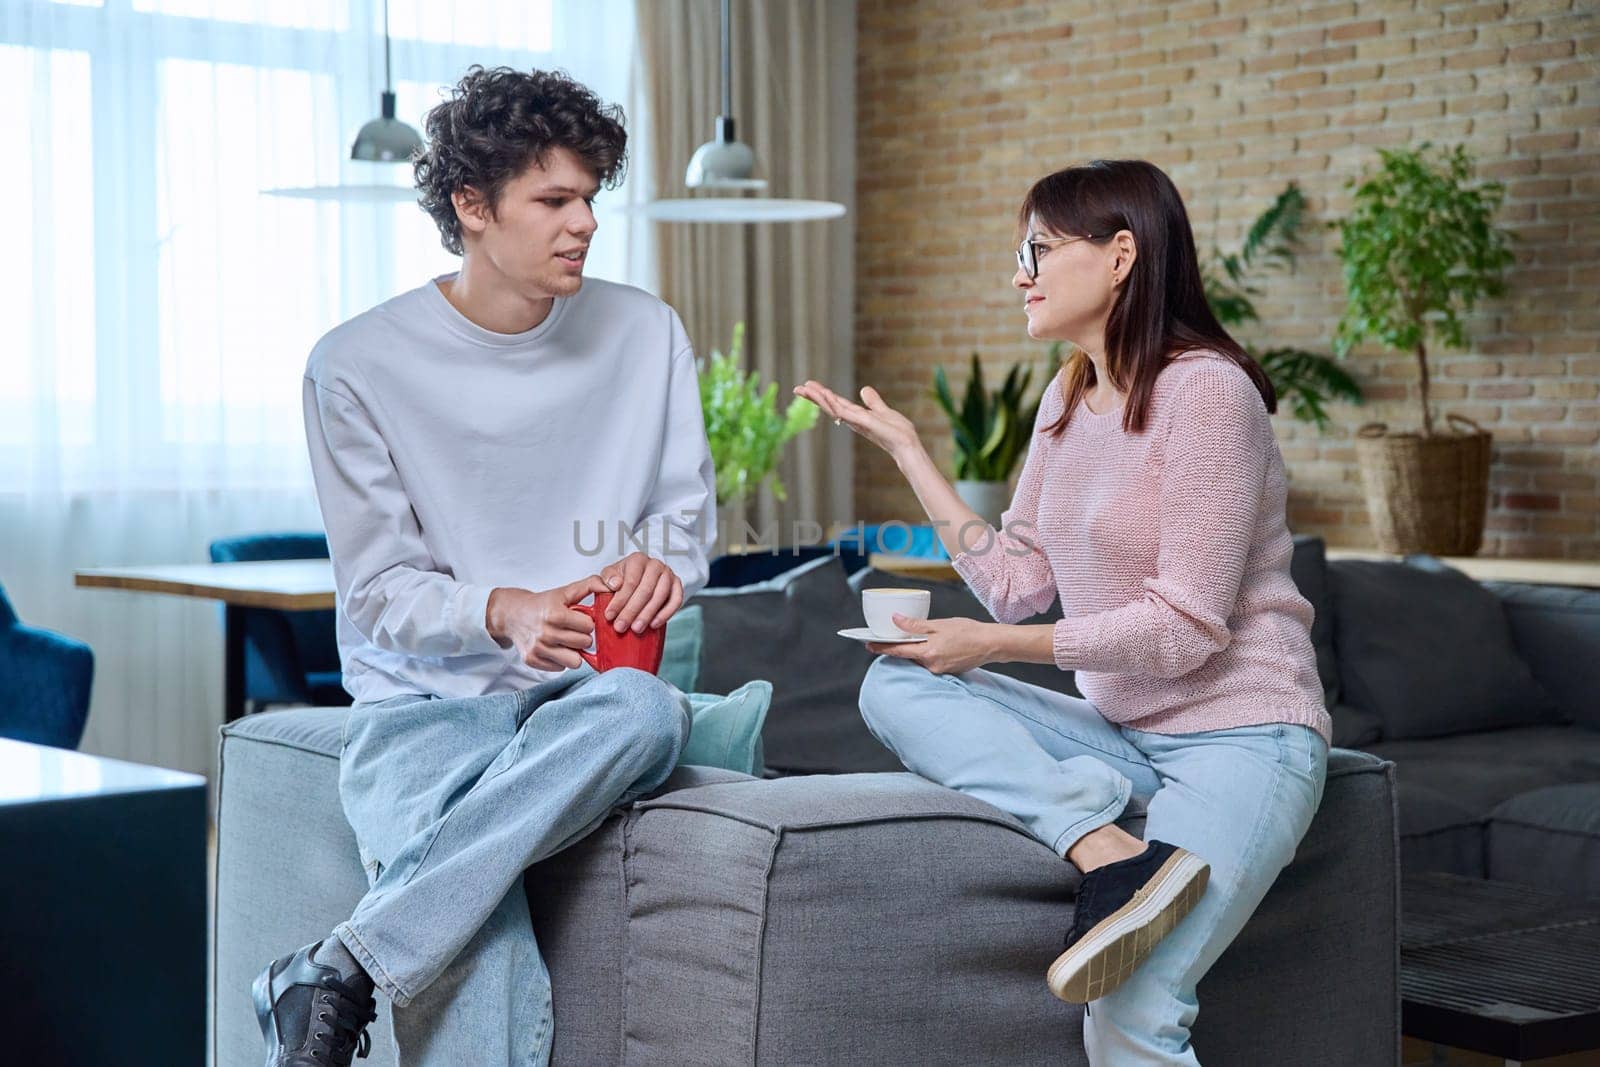 Middle aged mother and son 19, 20 years old talking together at home in living room. Family, relationships, communication mom teenage son, people concept